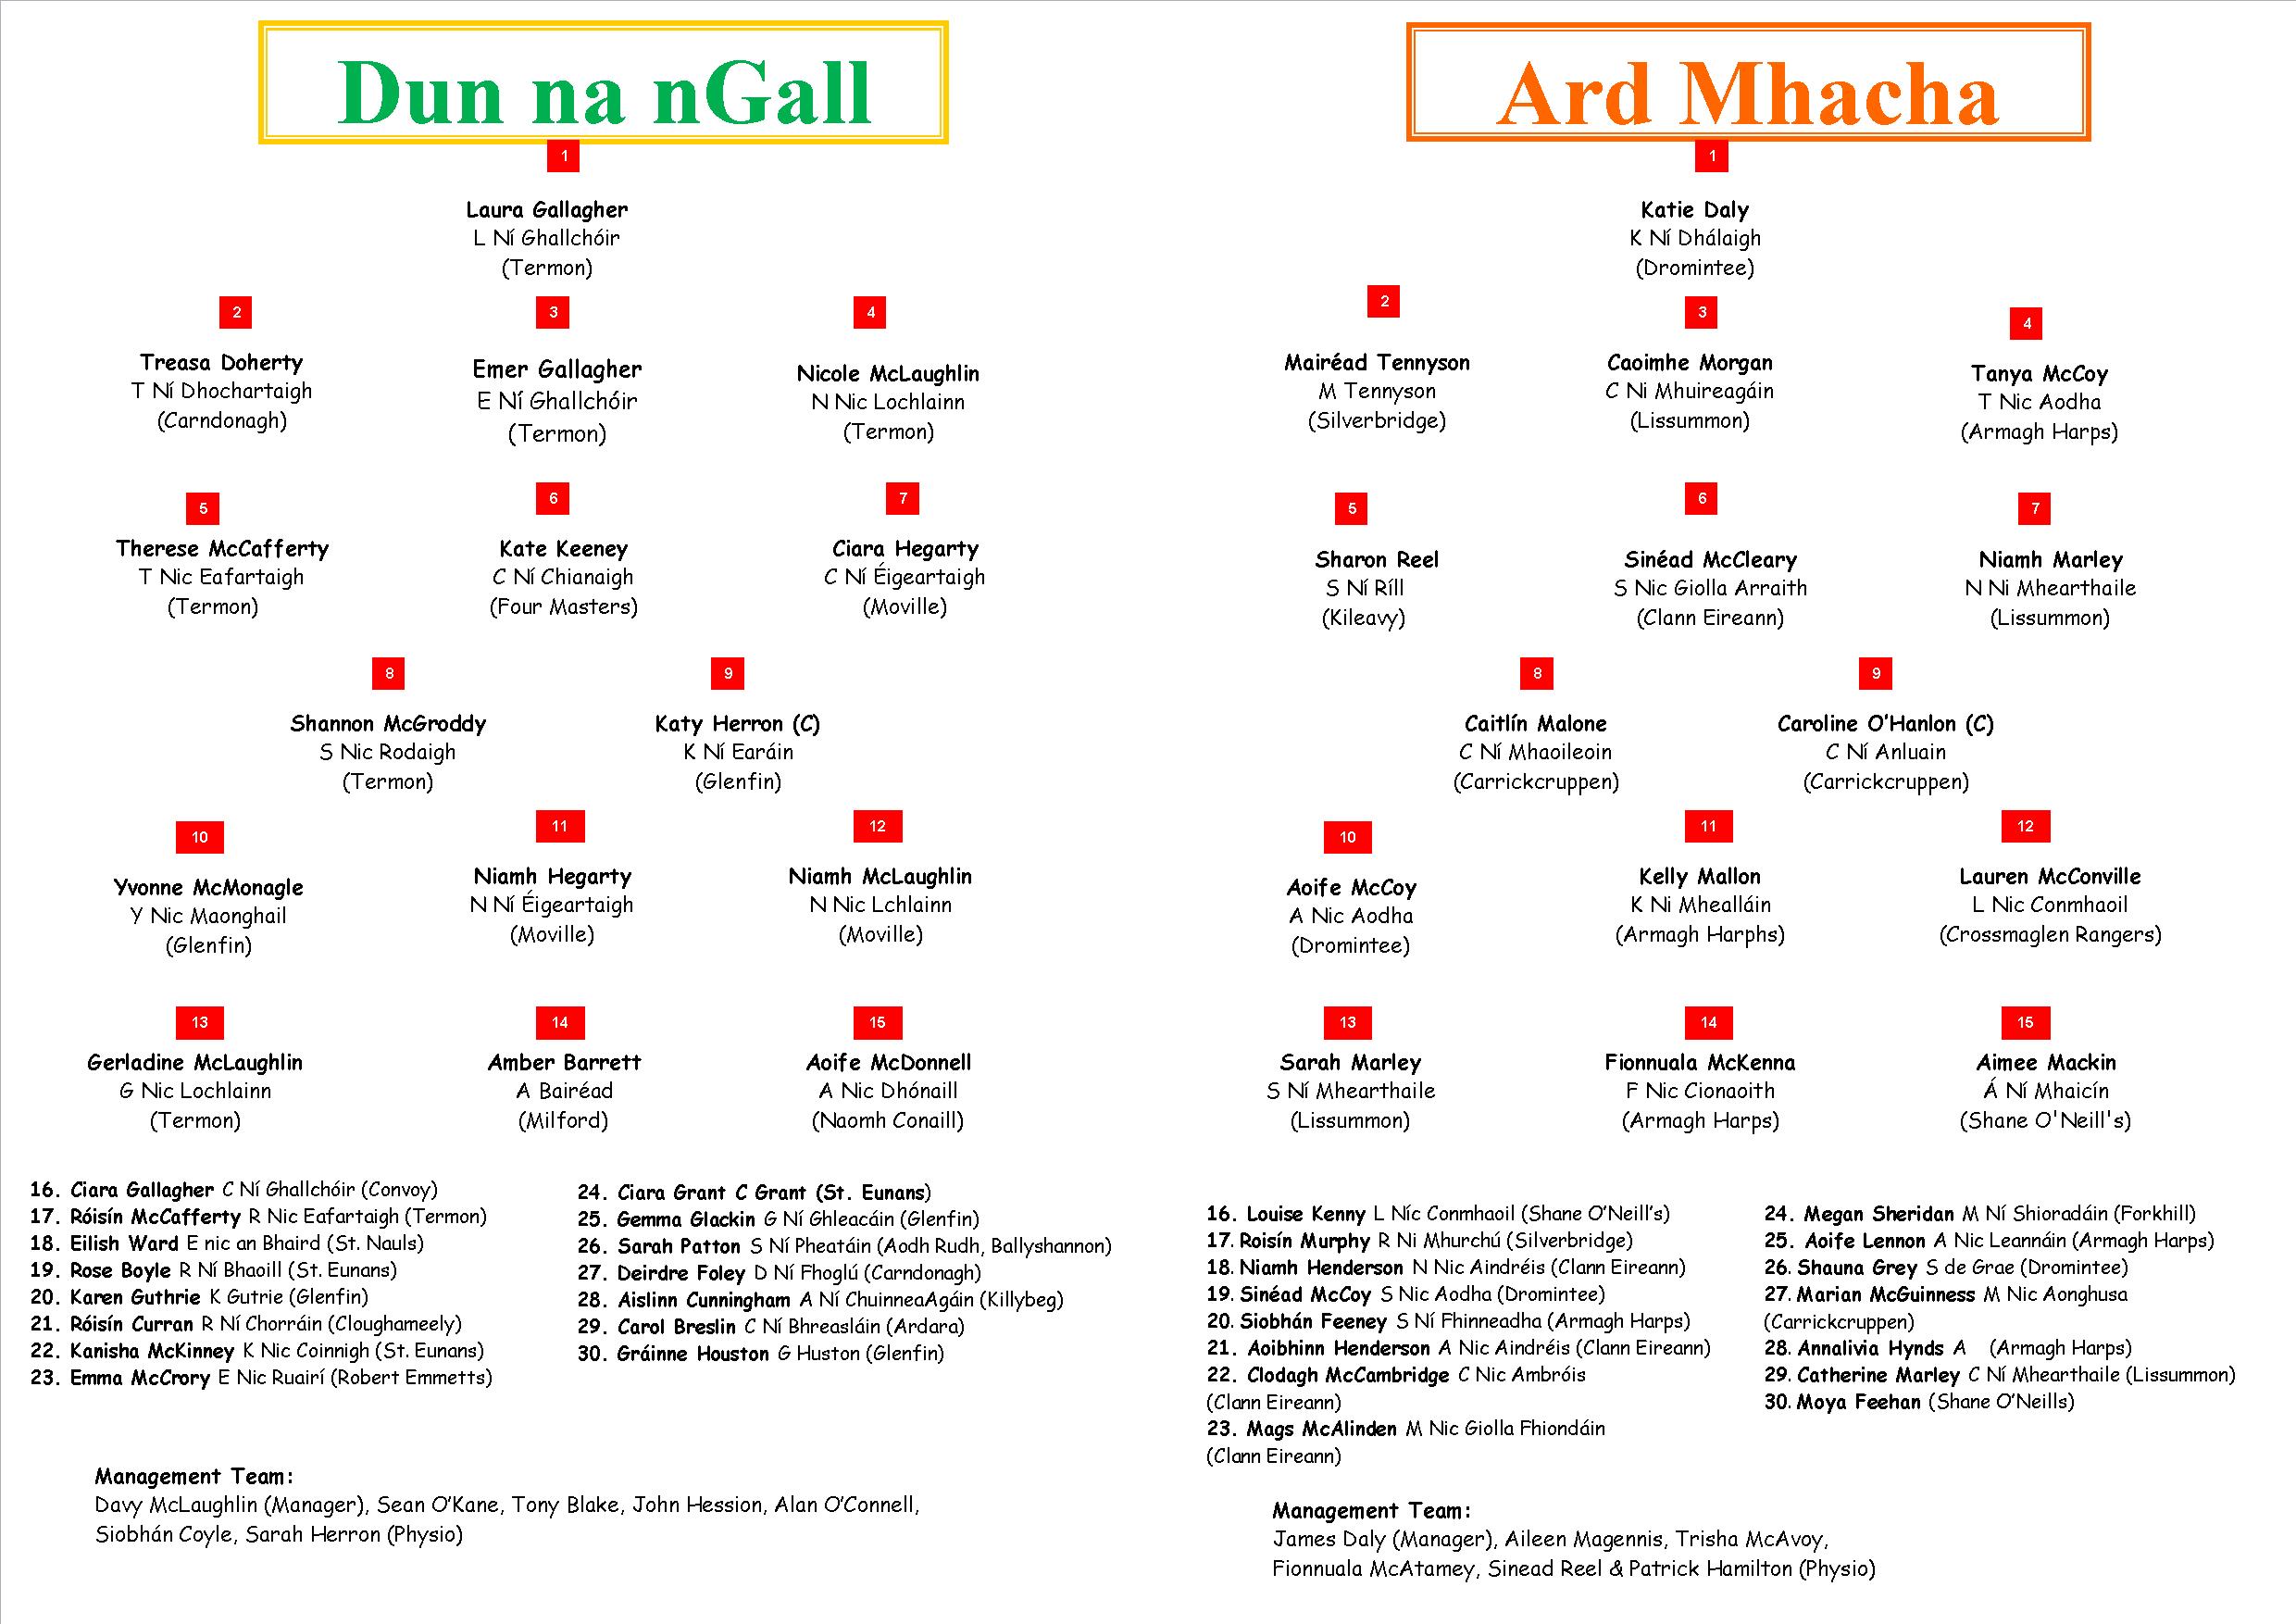 Donegal v Armagh